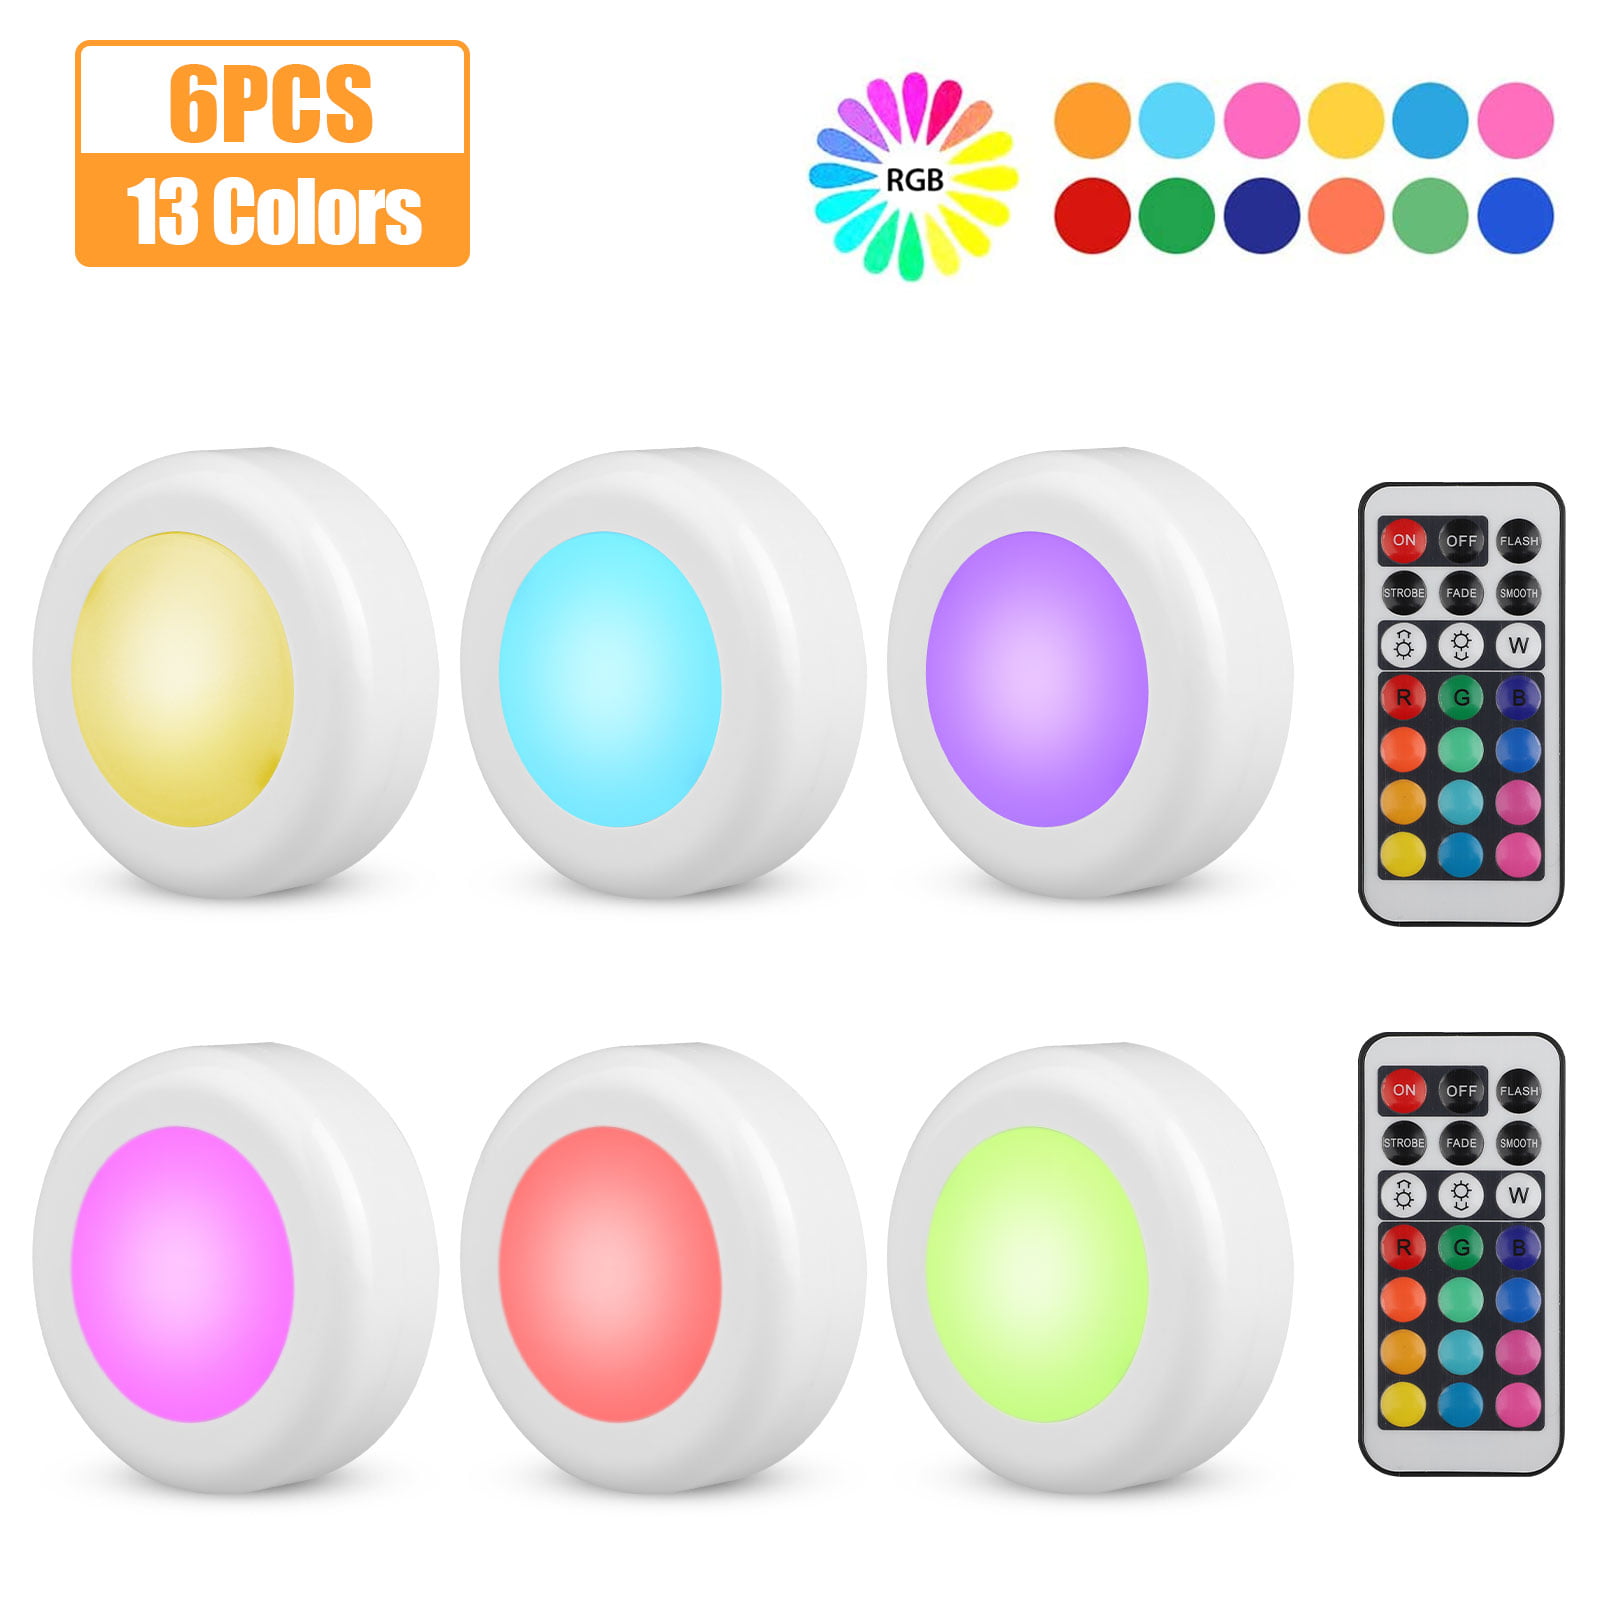 Details about   16 Color RGB Wireless LED Under Cabinet Light Battery Operated Remote Control 